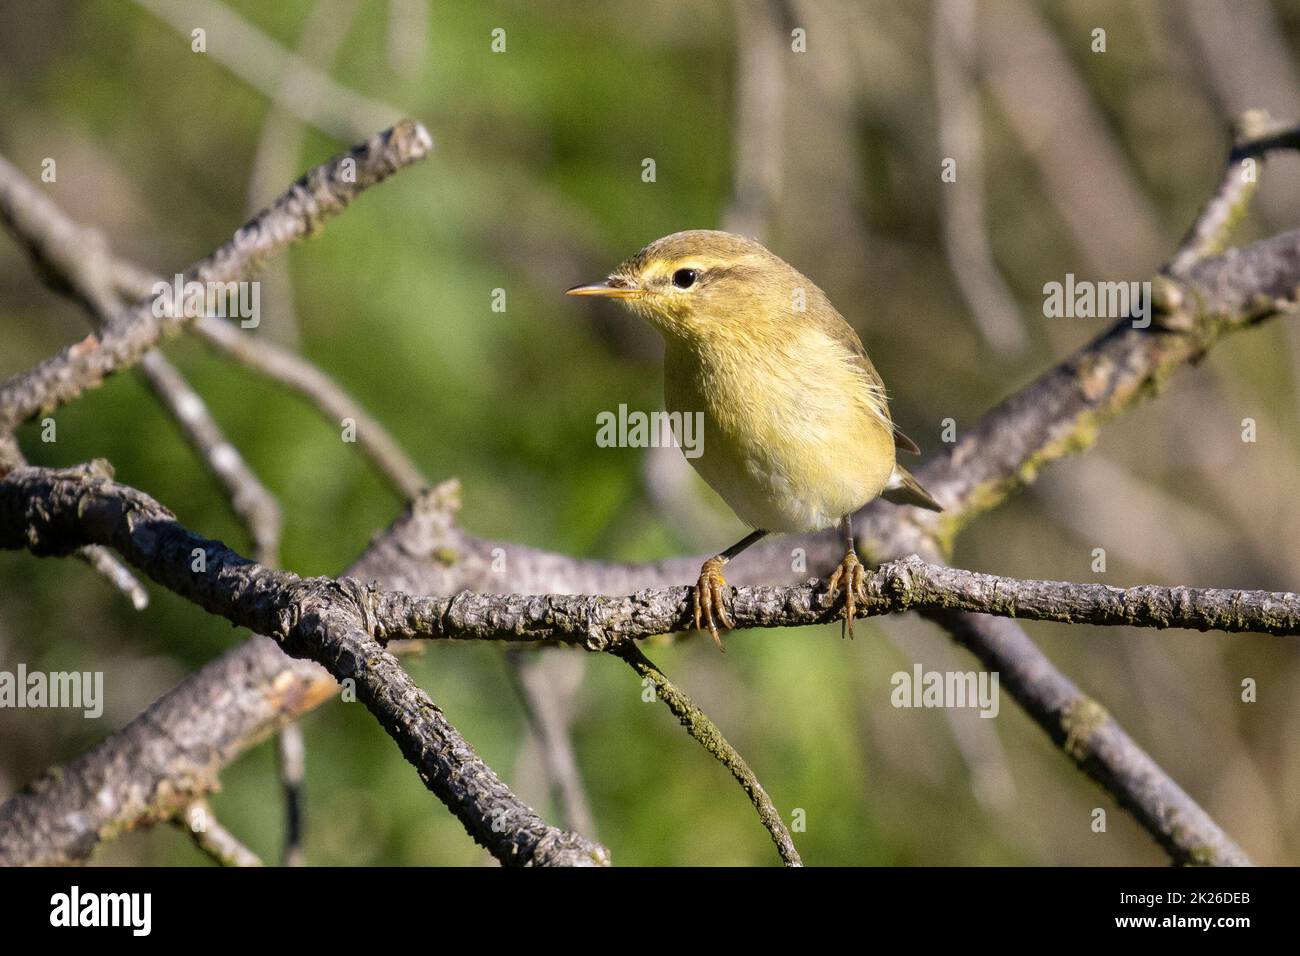 Willow warbler (Phylloscopus trochilus) siting on a tree branch, Yorkshire, UK Stock Photo